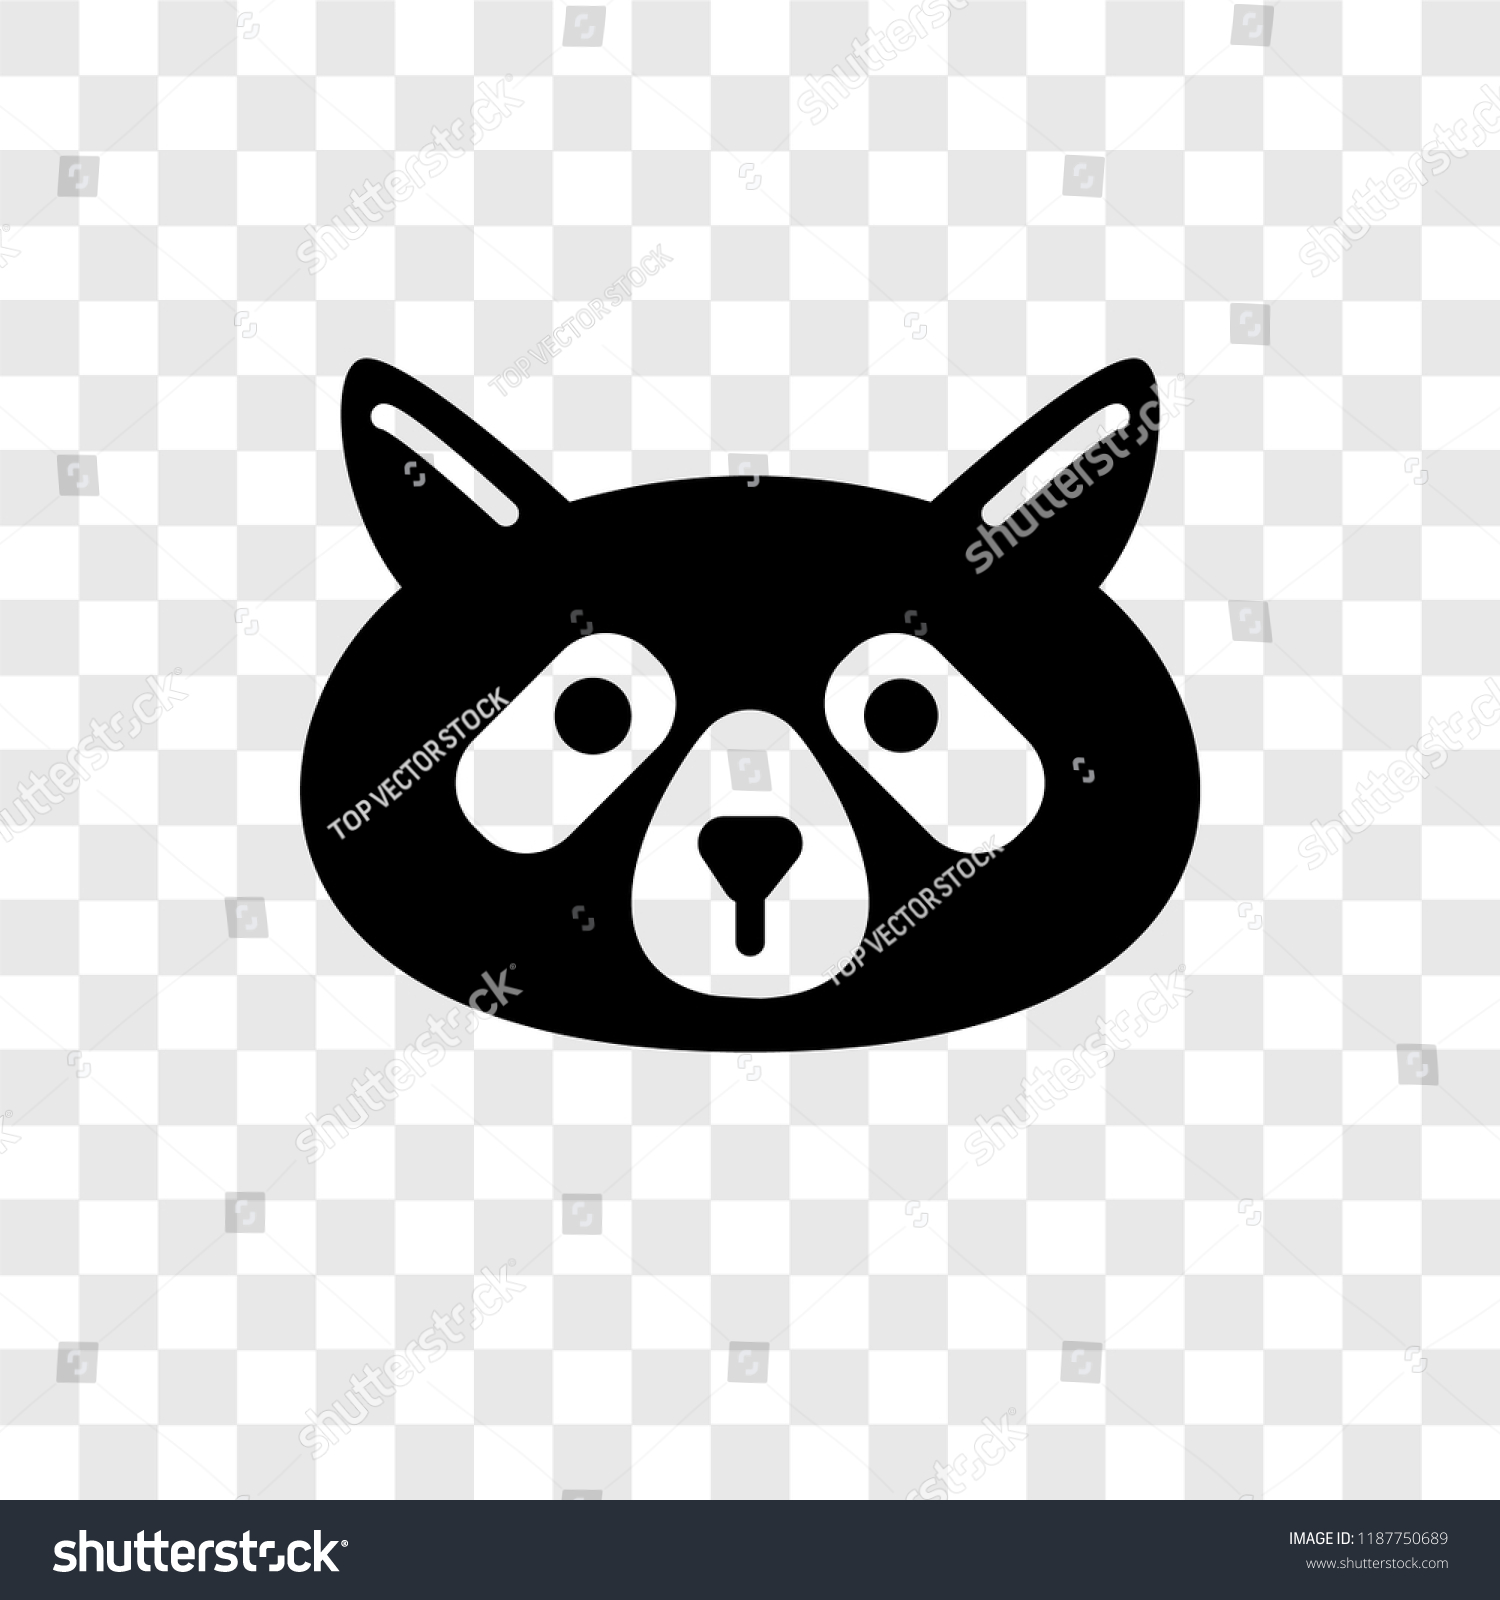 SVG of Raccoon vector icon isolated on transparent background, Raccoon transparency logo concept svg